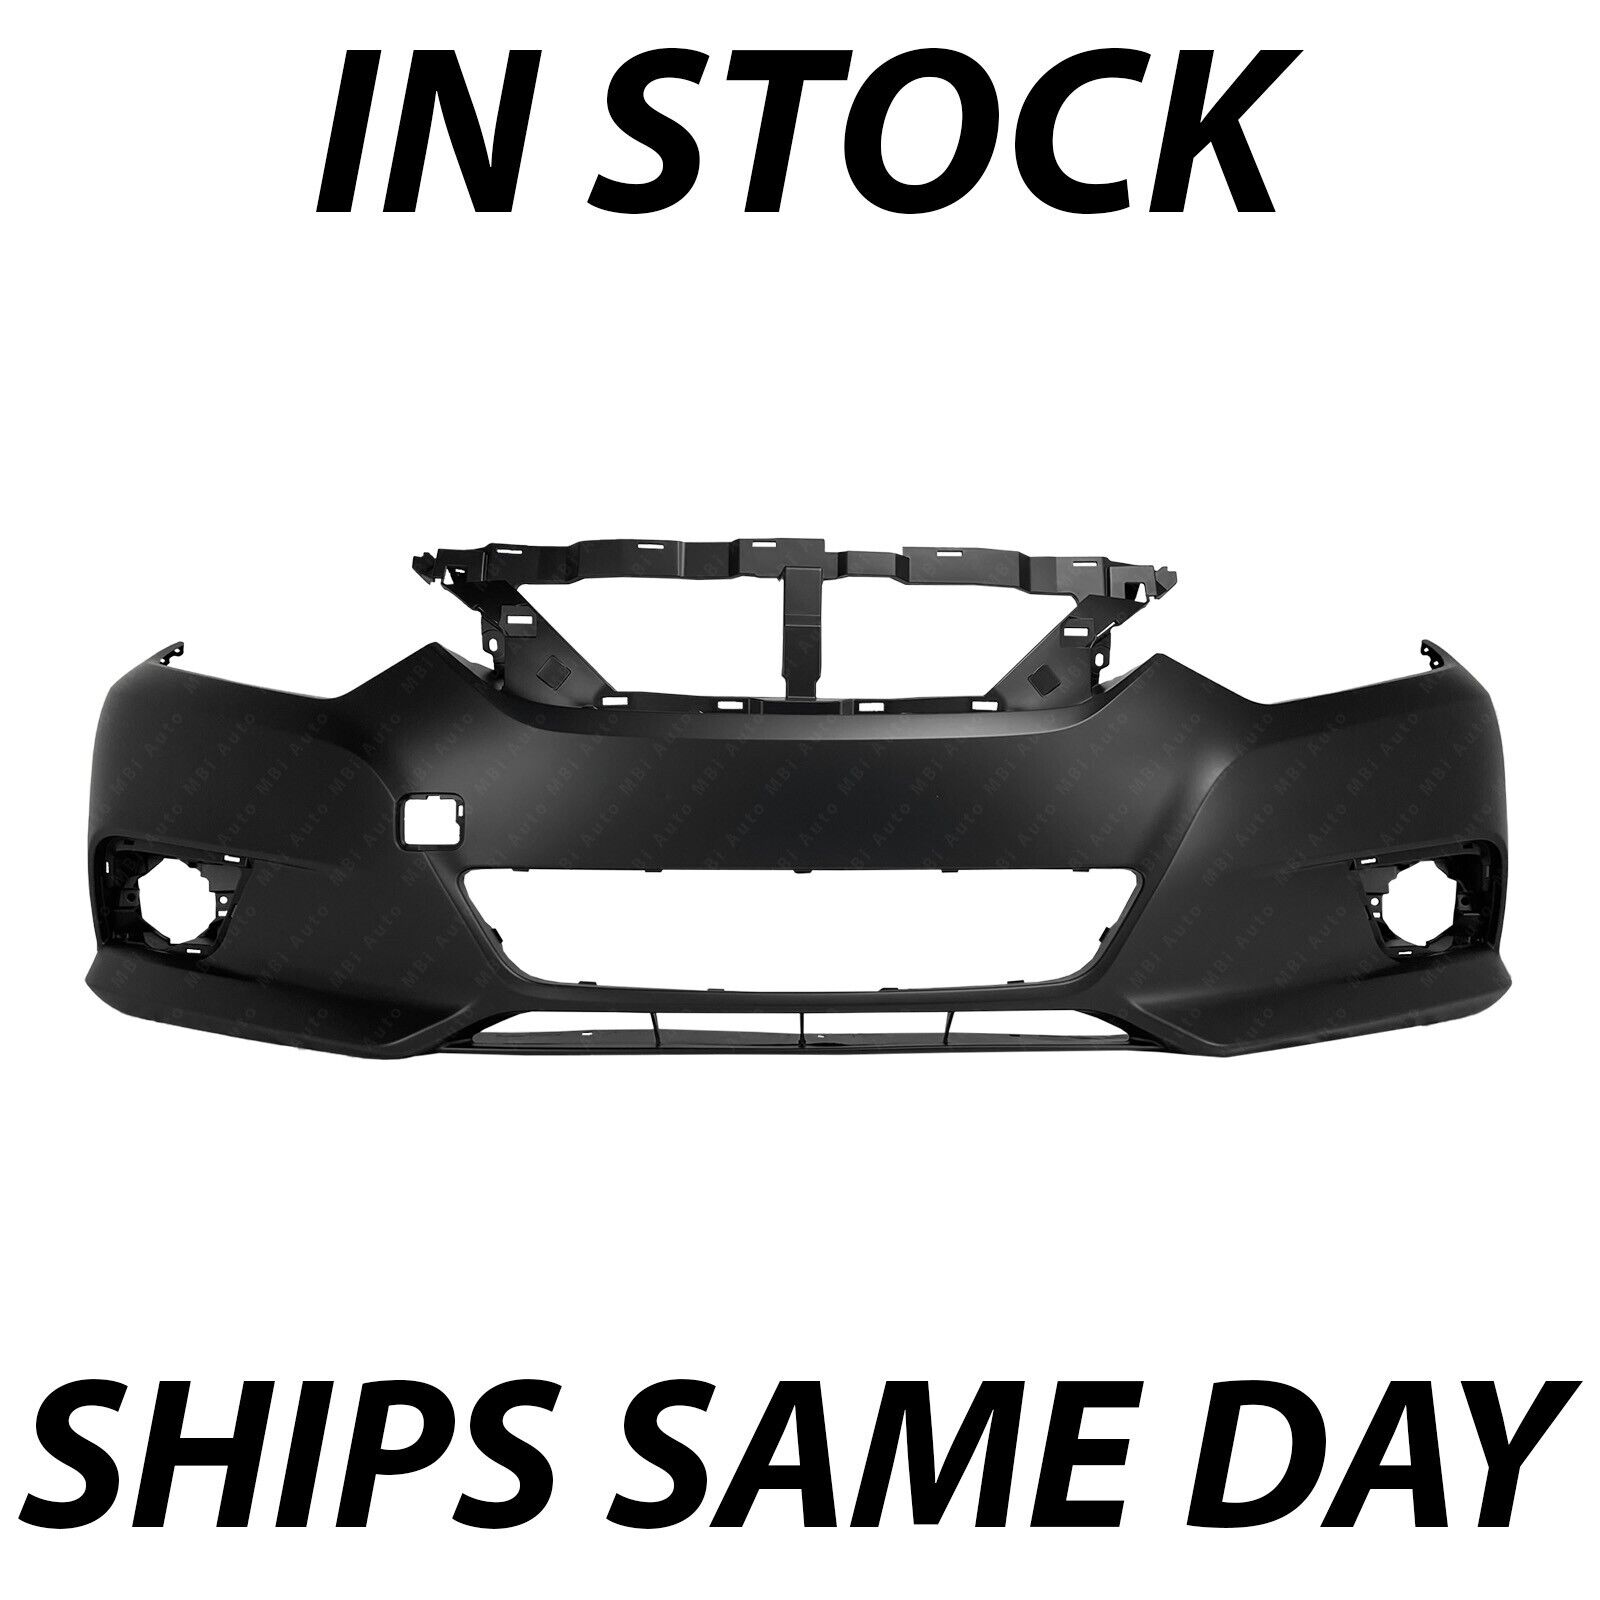 NEW Primered Front Bumper Cover Fascia Replacement for 2016-2018 Nissan Altima